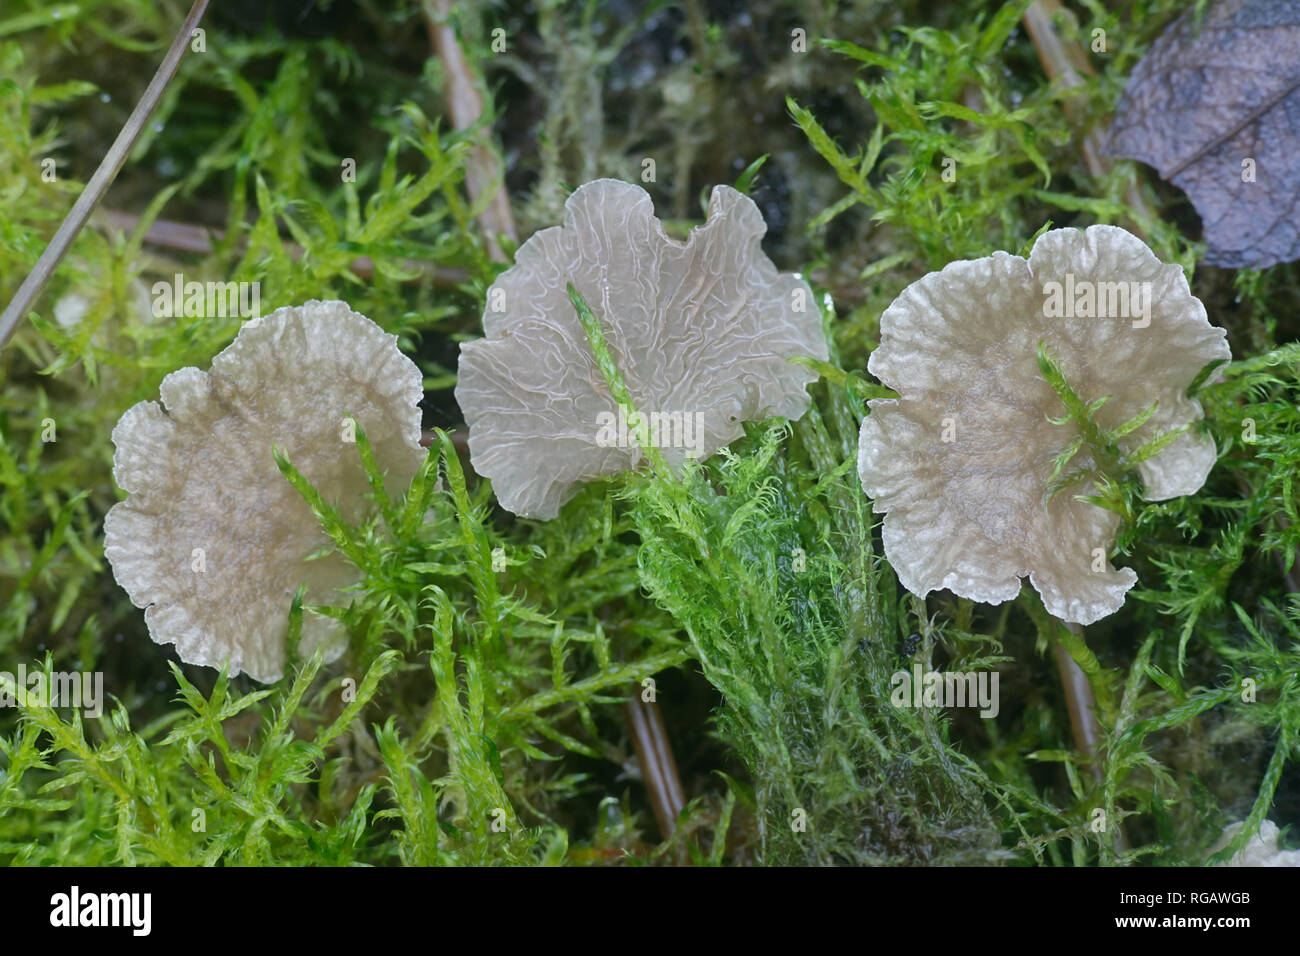 Arrhenia lobata, known as the lobed oysterling, wild mushroom from Finland Stock Photo